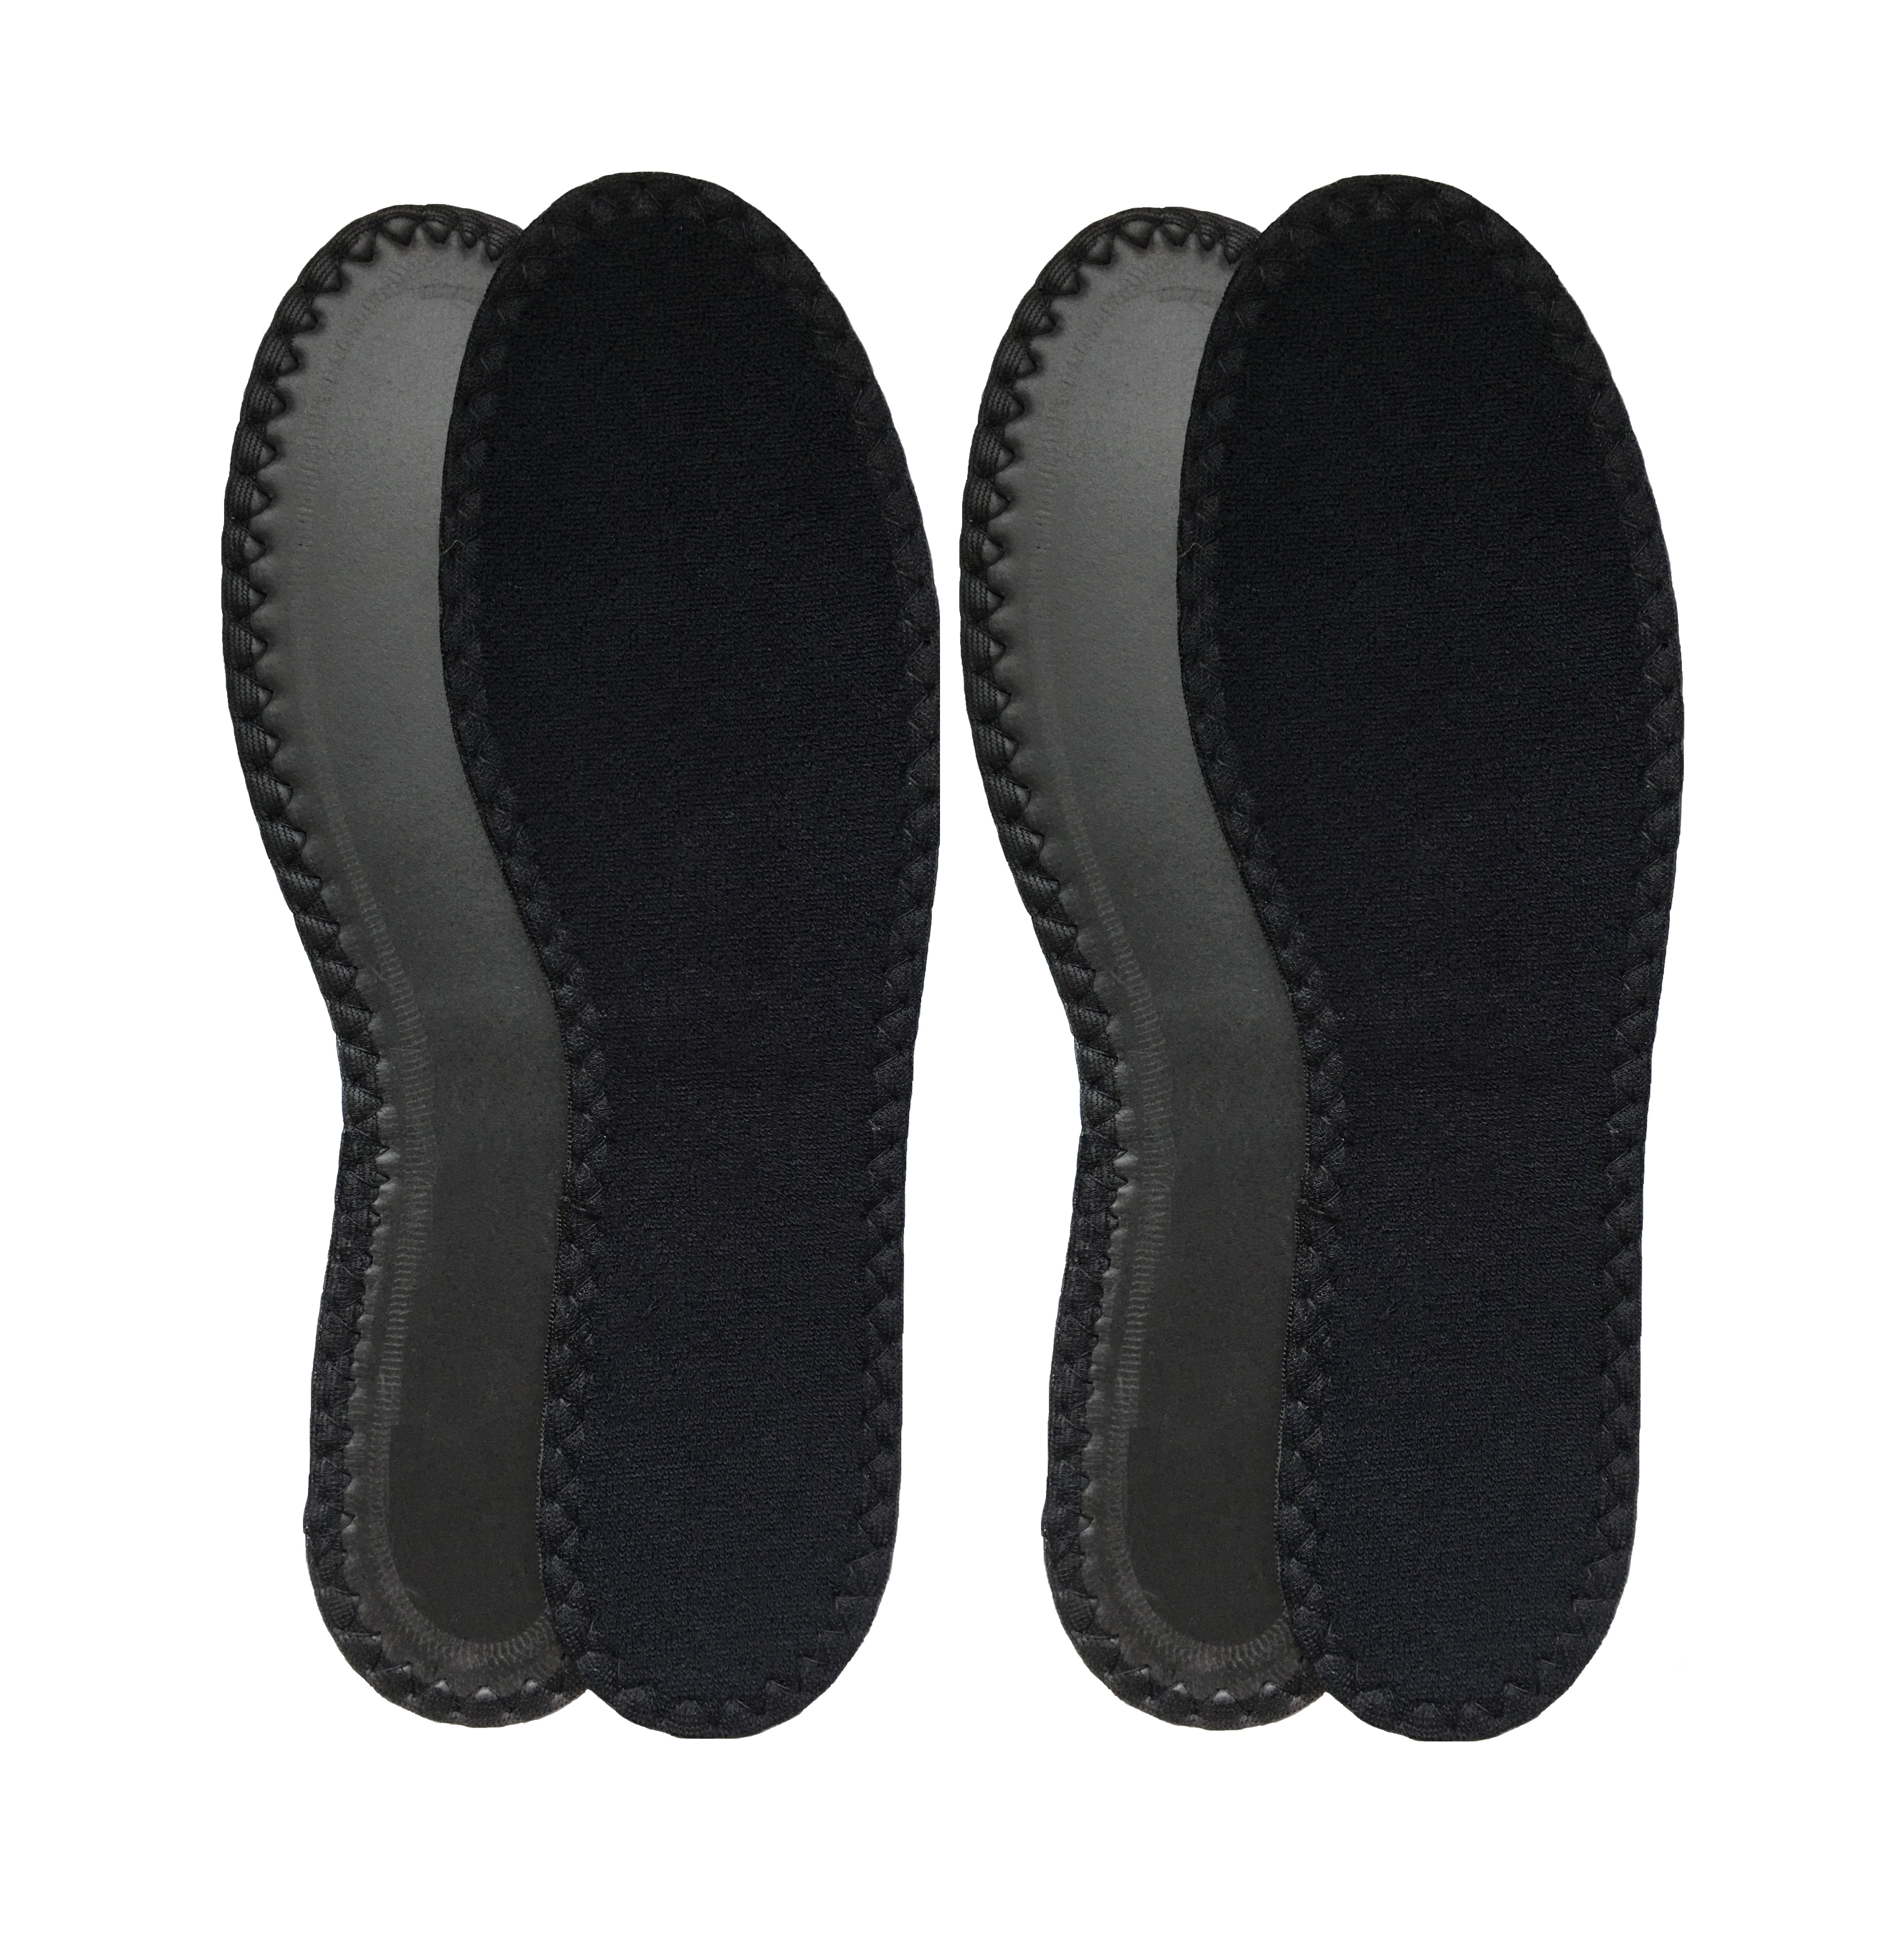 Qty = 2 Pairs Happy Step Black Terry Insoles Black Size 9 